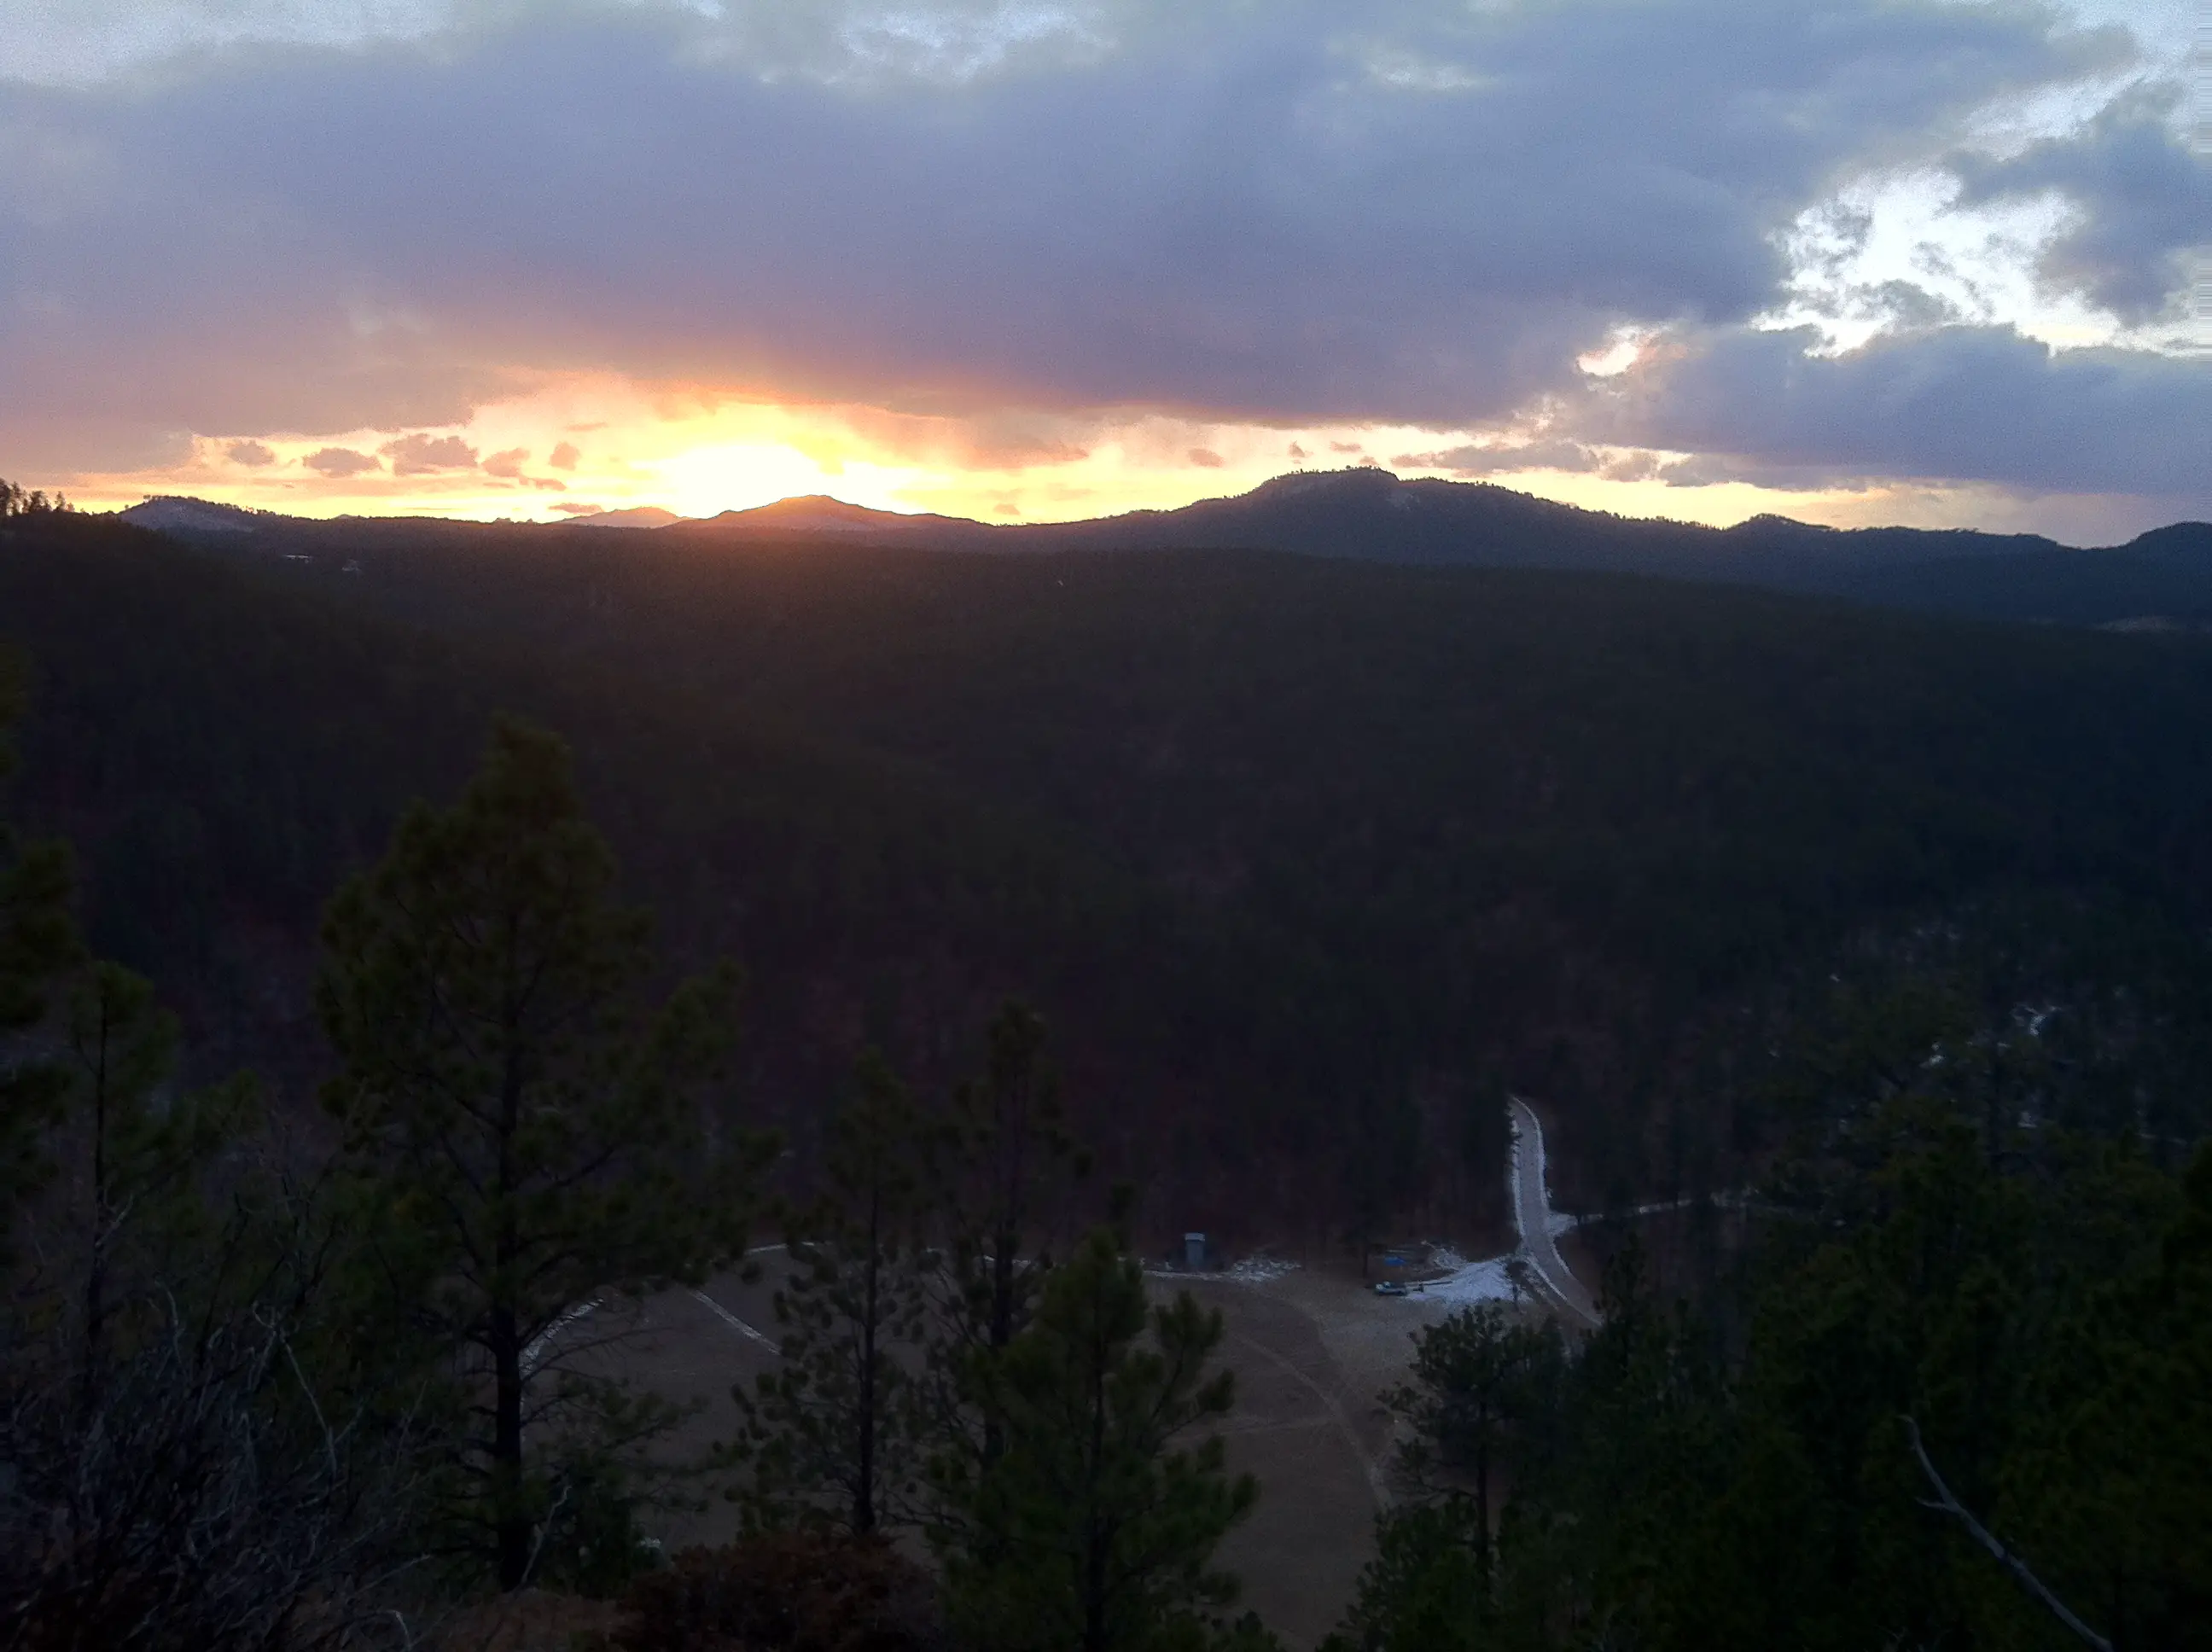 Sunset shot from above over a valley floor. There is a meadow and pine trees at the bottom. The dark silhouette of mountains is in the distance with the sun setting behind them.